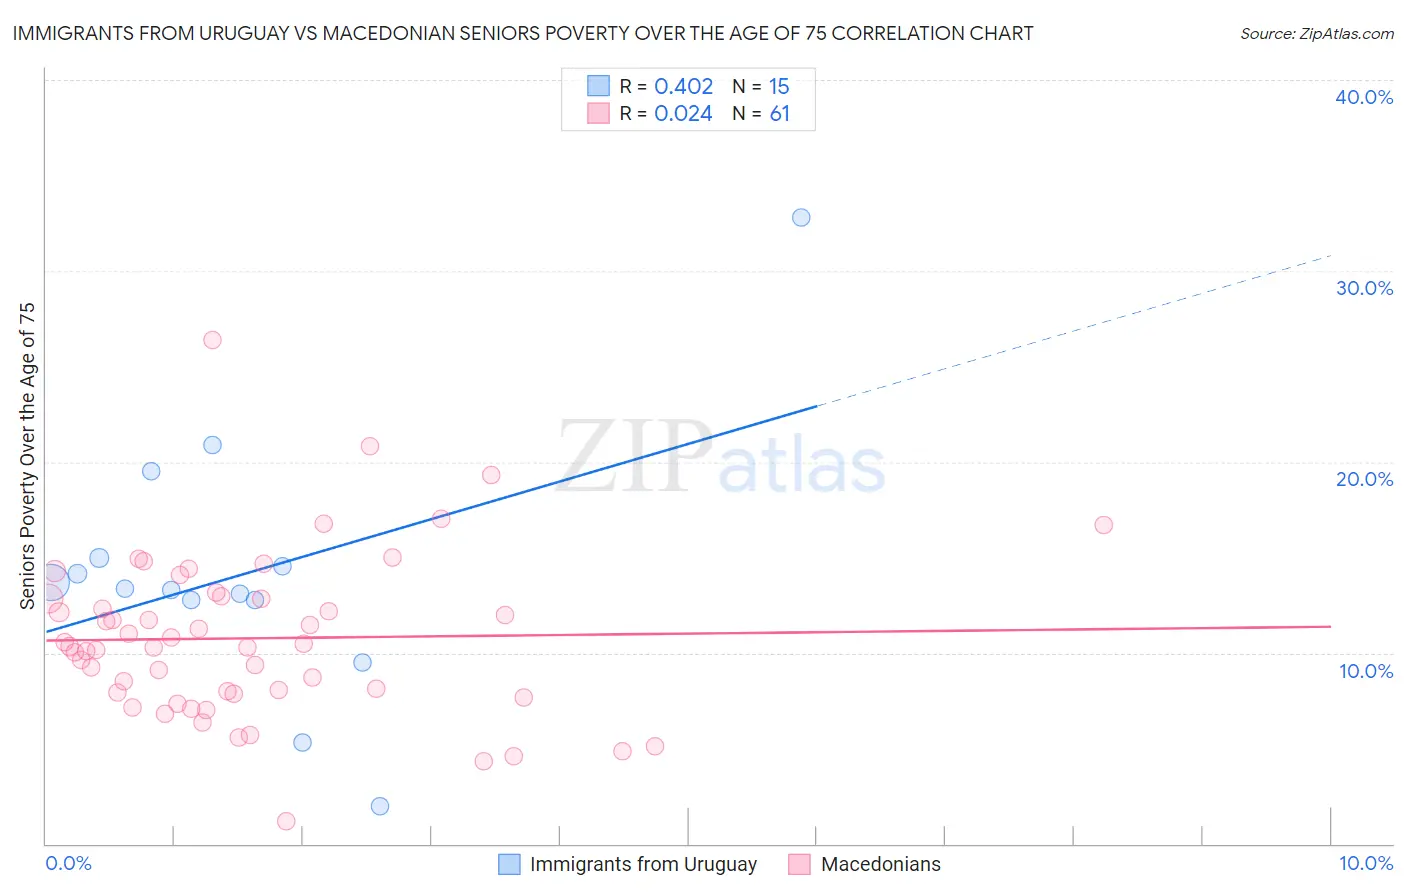 Immigrants from Uruguay vs Macedonian Seniors Poverty Over the Age of 75